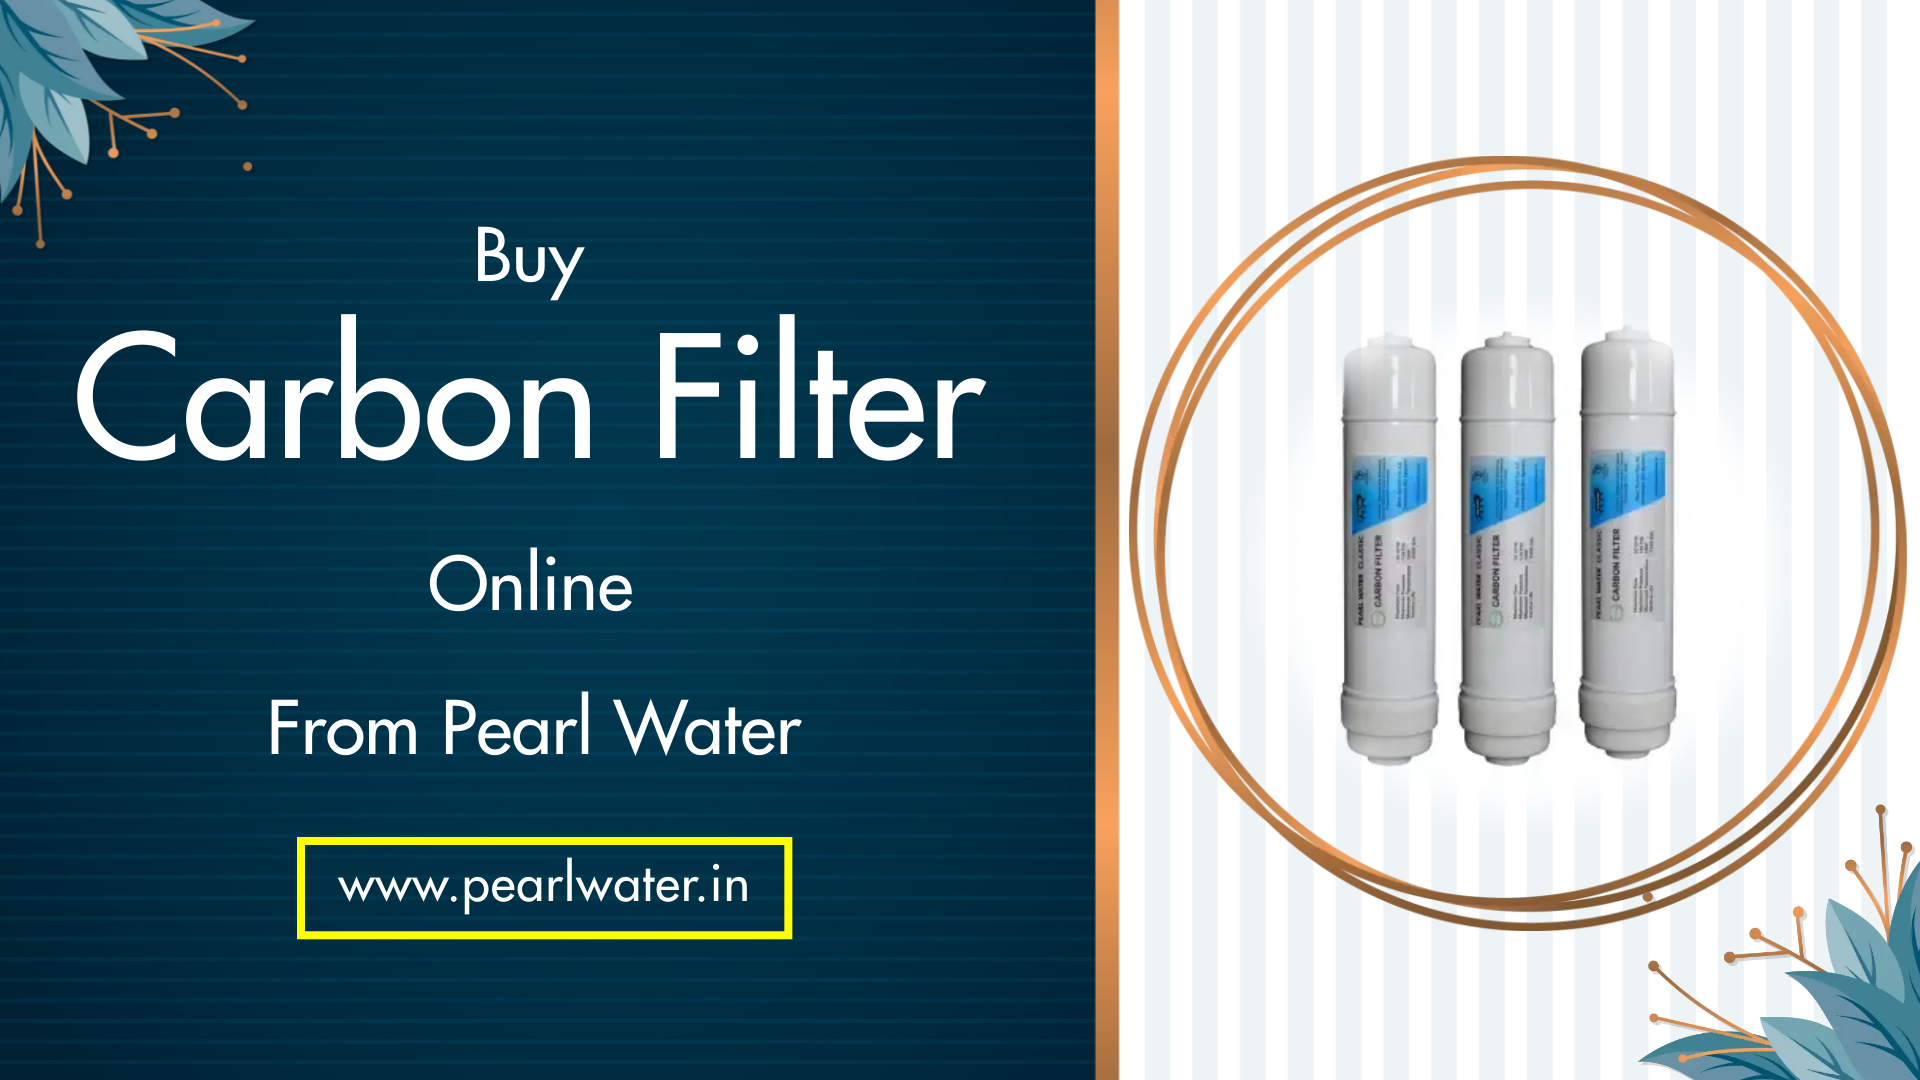 Buy Pearl Water Carbon filter at Best Price from Pearl Water website